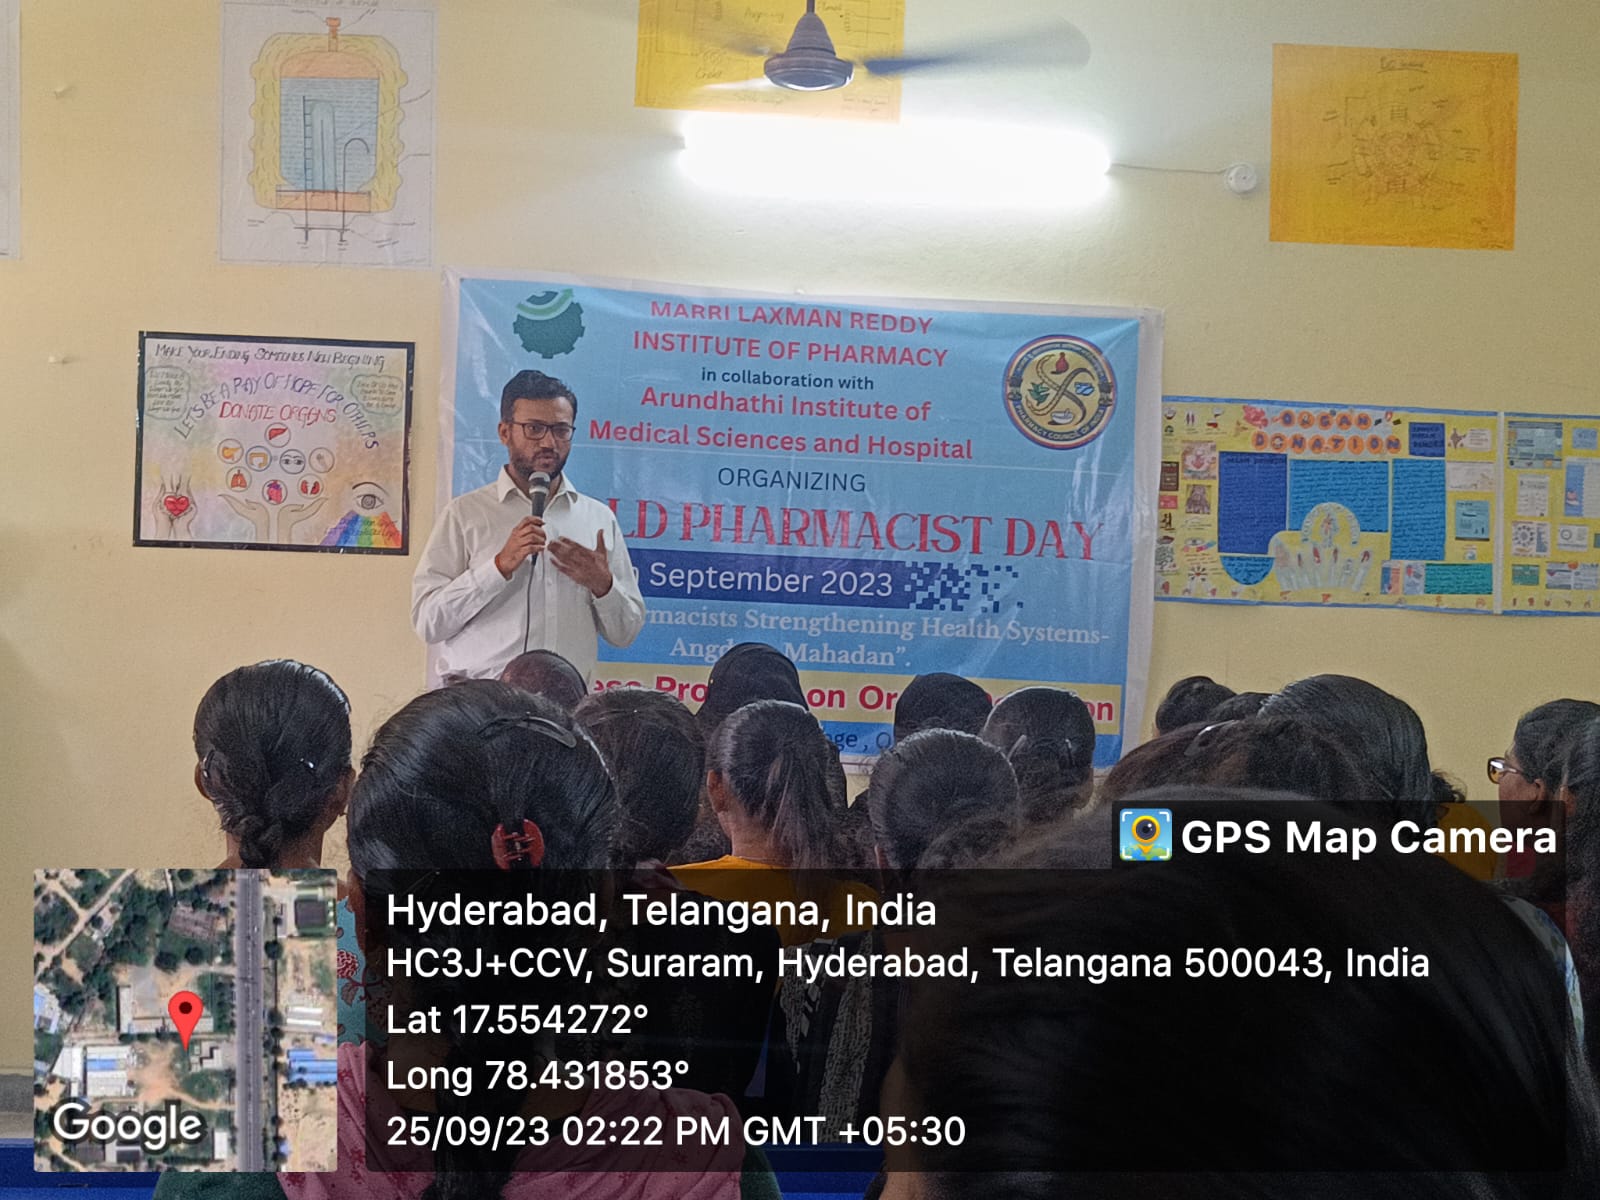 Extension Lecture by MLR Institute on World Pharmacist Day